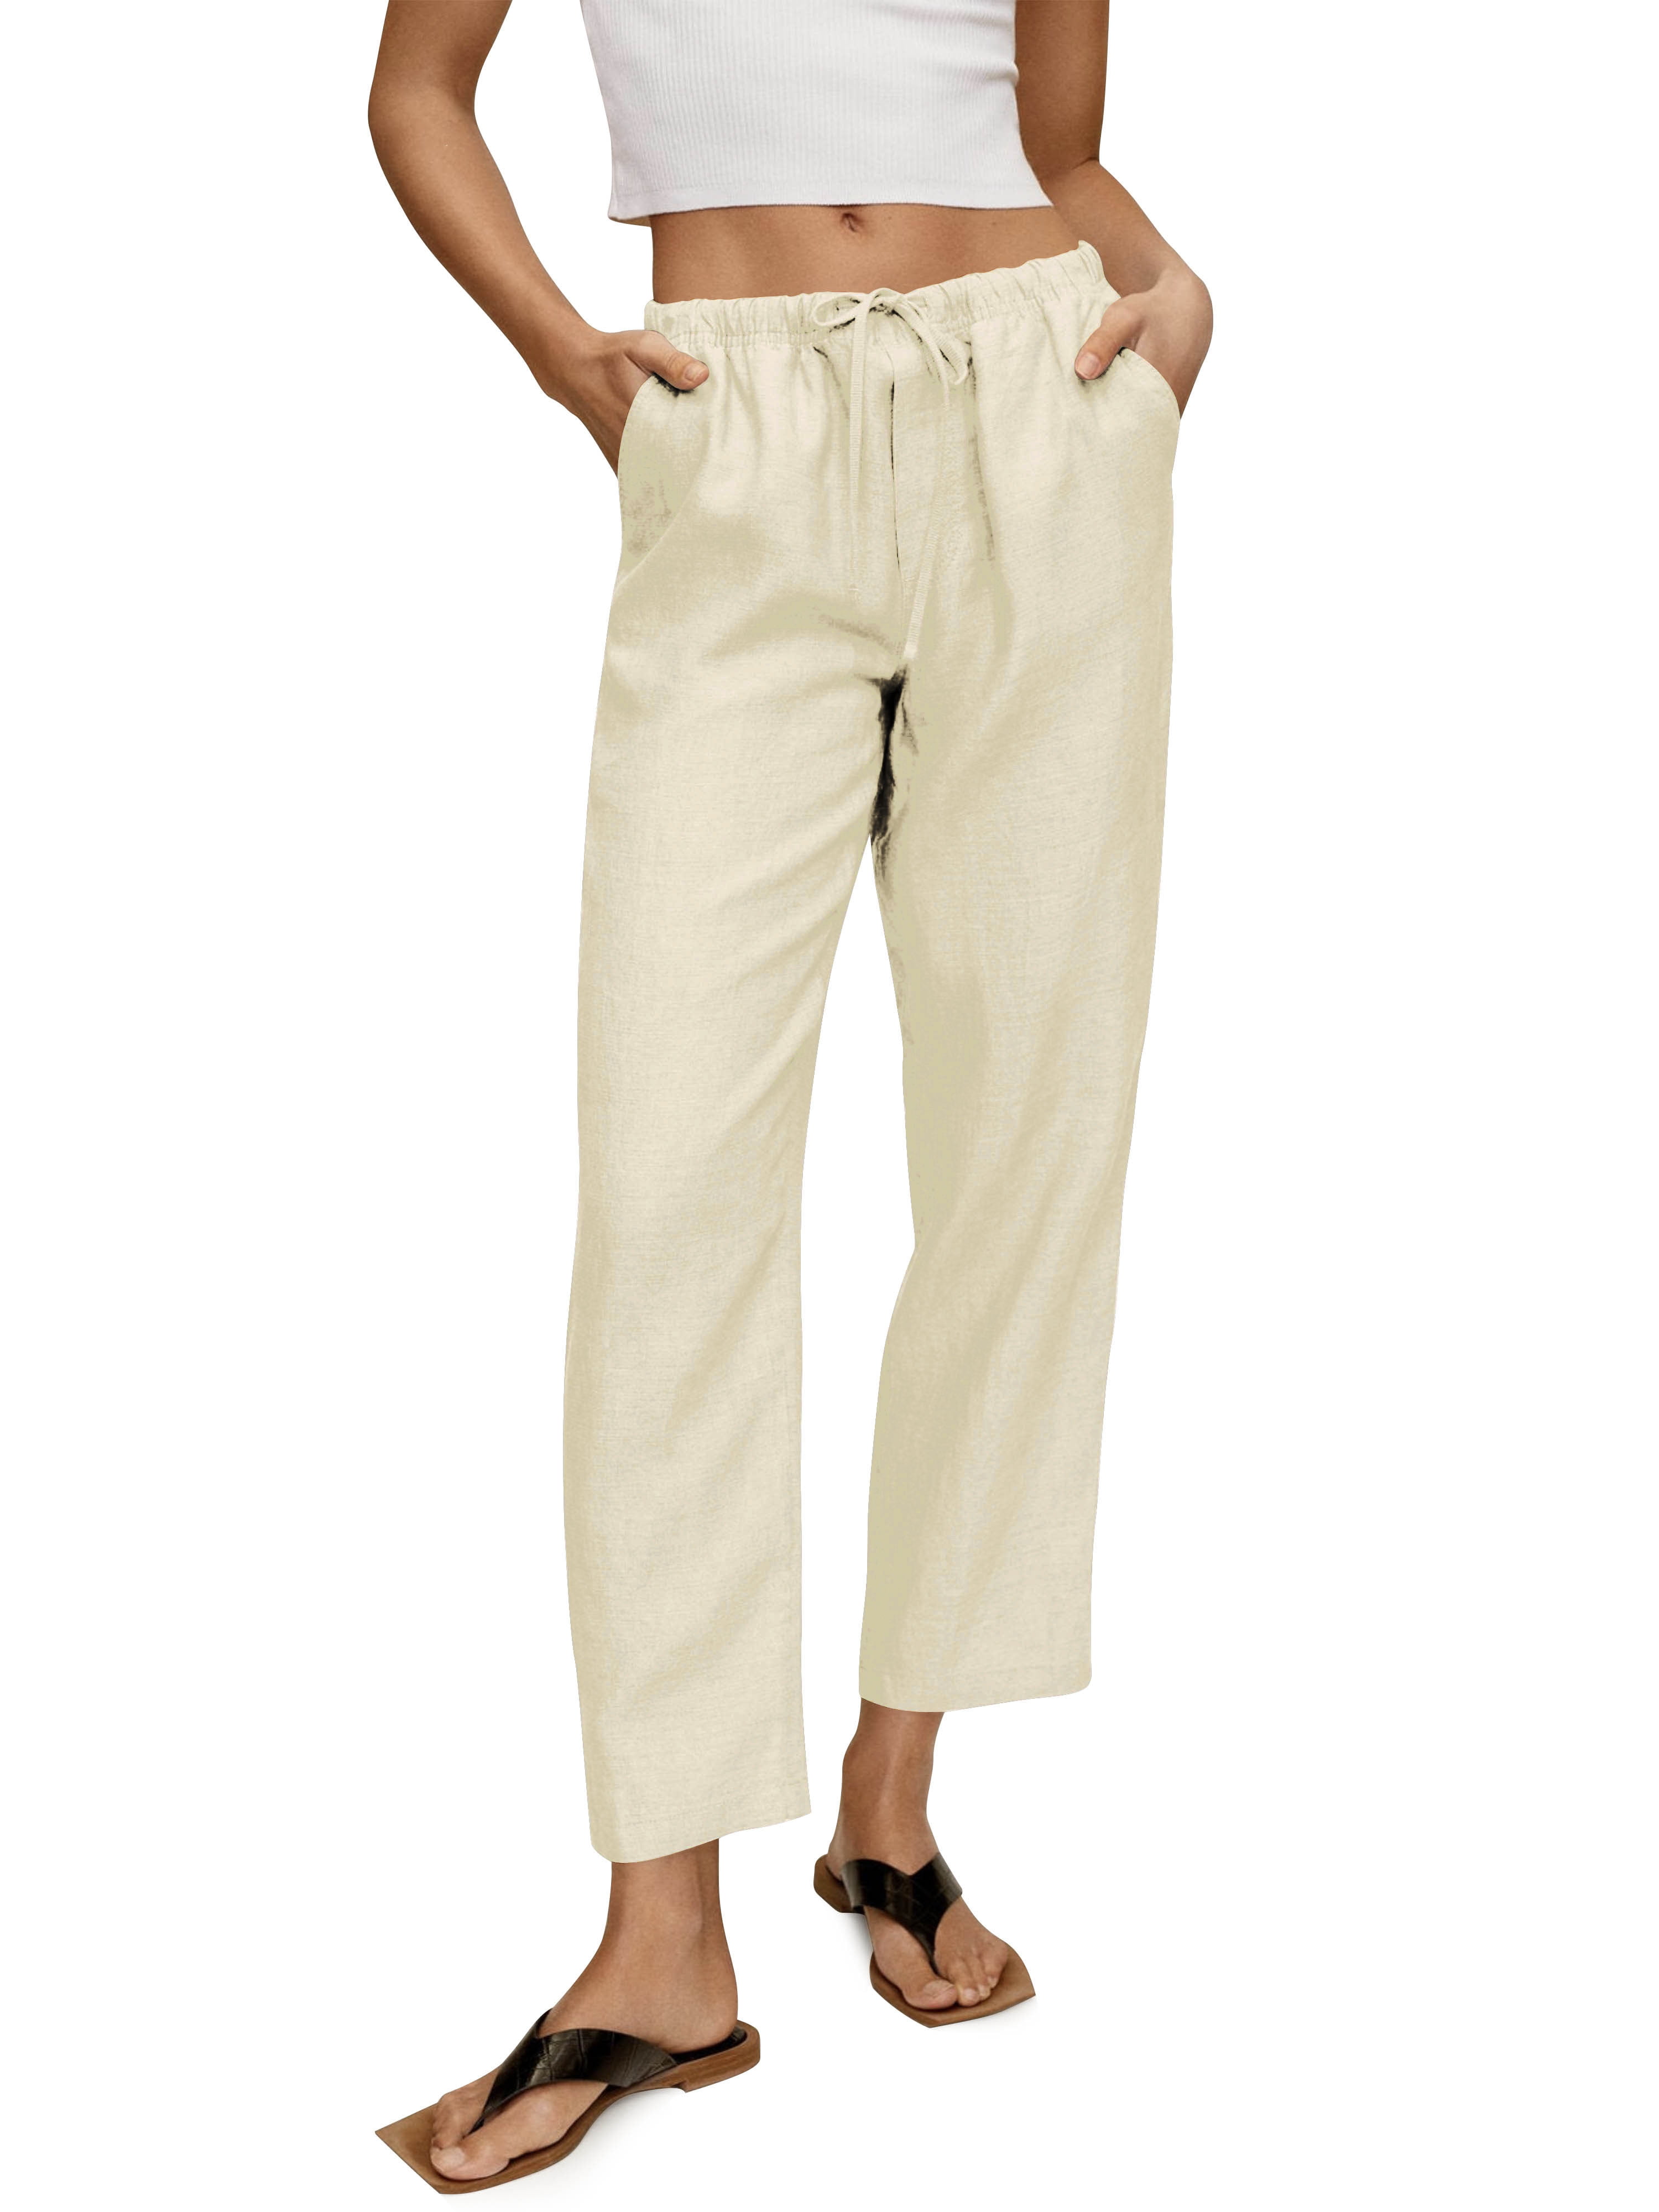 Hat and Beyond Women's Classic Slim-Fit Linen Pants with Waist Band 